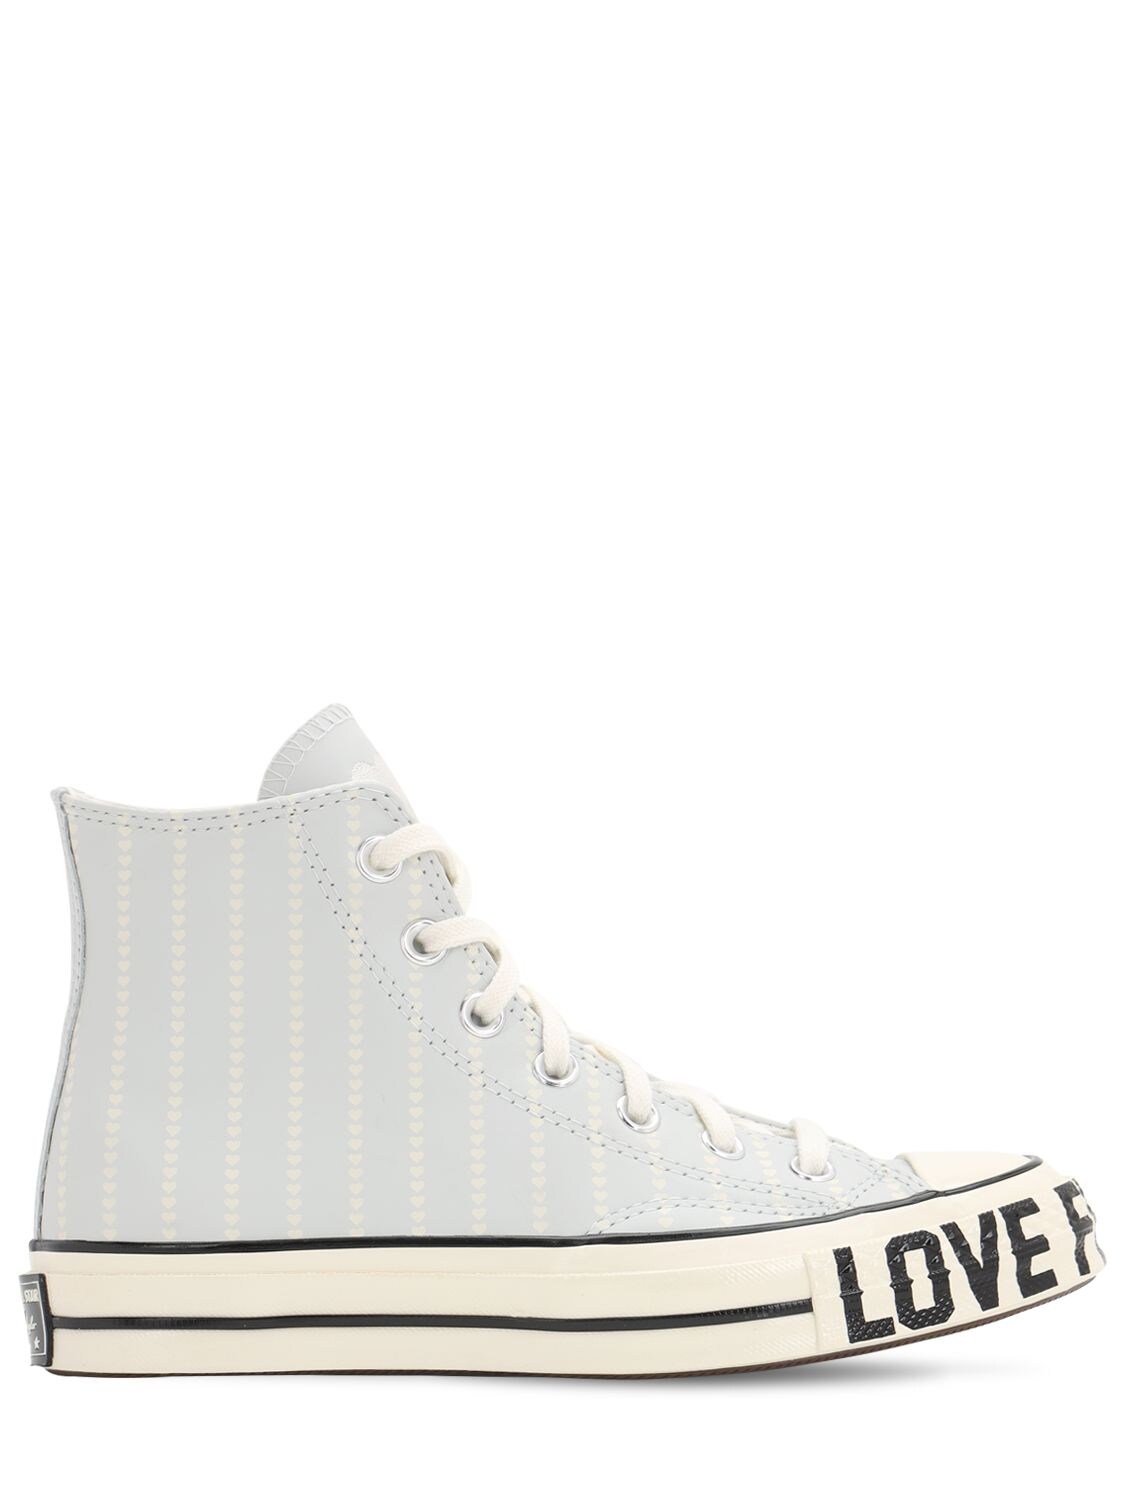 Image of Chuck 70 Love Fearlessly Hi-top Sneakers